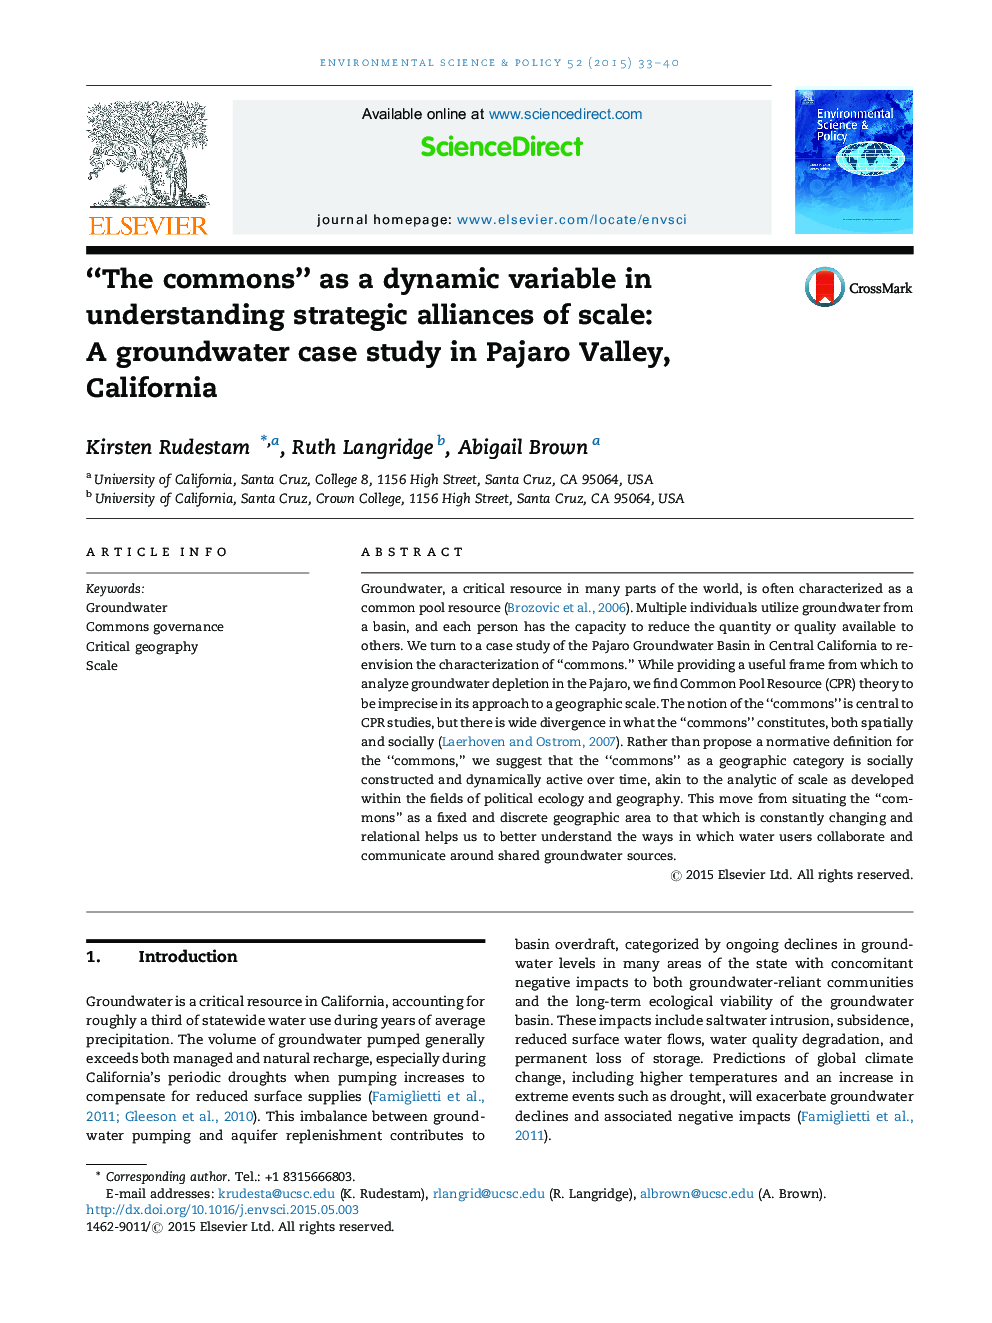 “The commons” as a dynamic variable in understanding strategic alliances of scale: A groundwater case study in Pajaro Valley, California